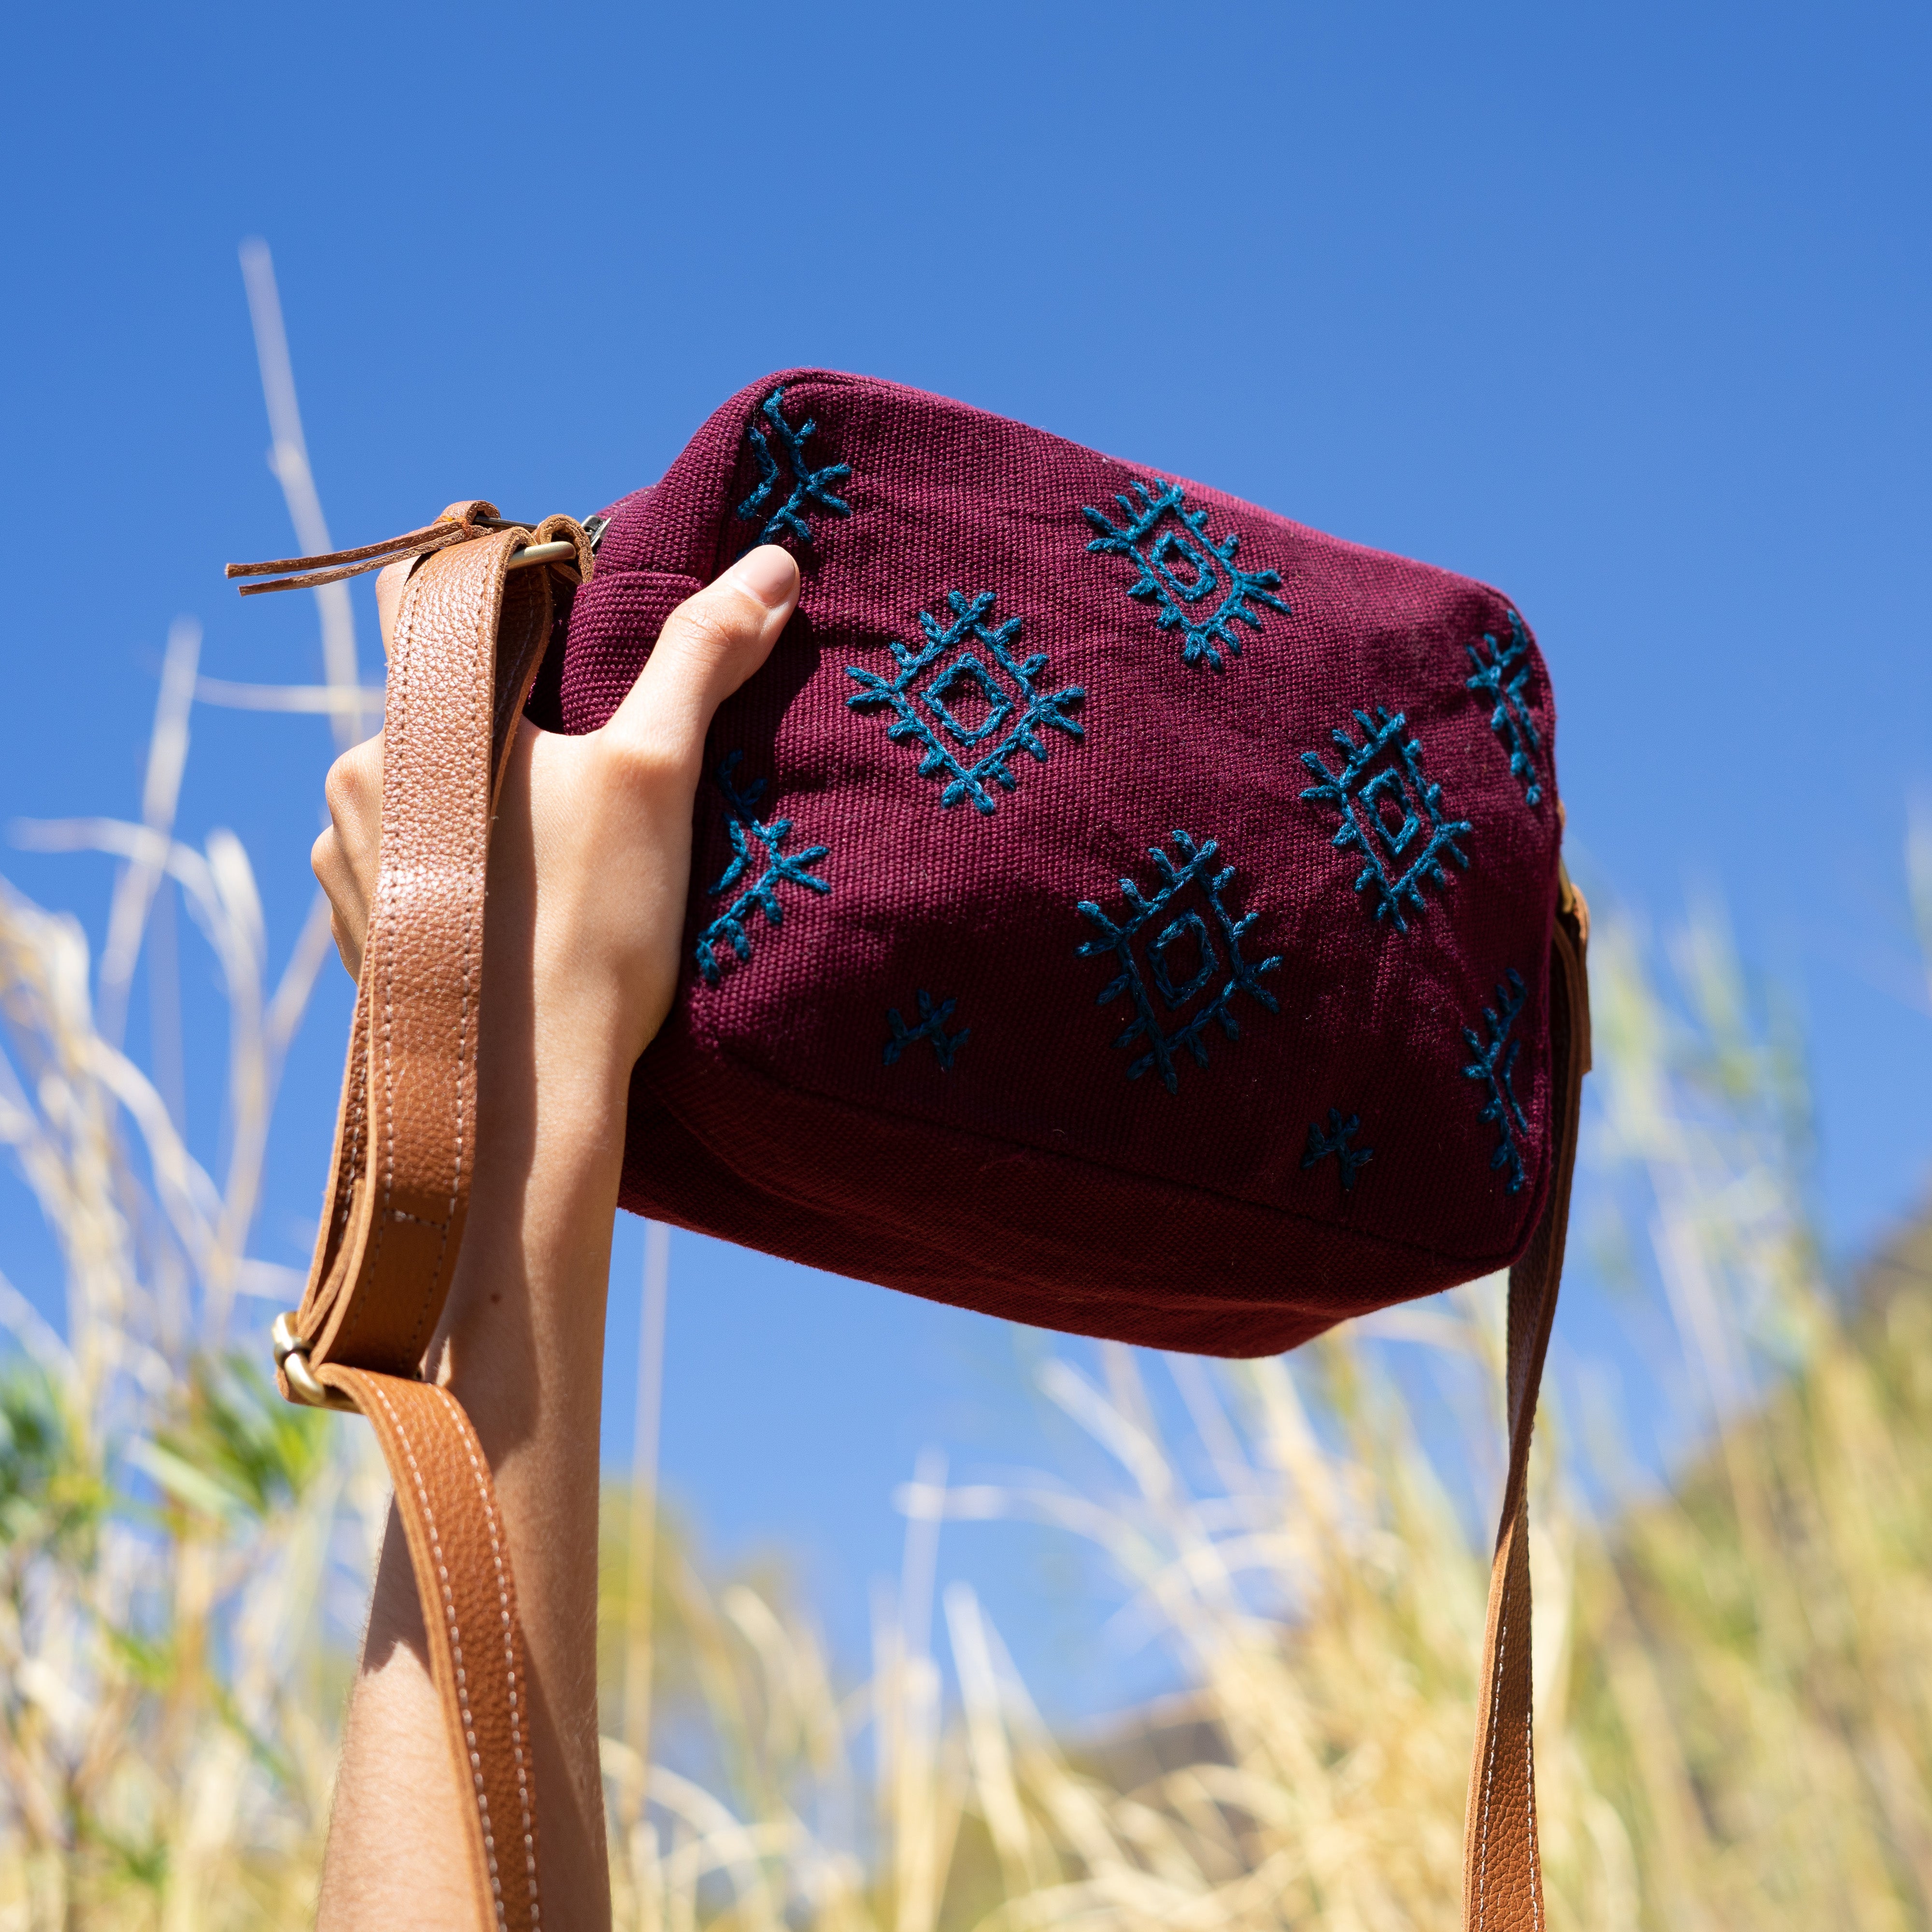 A model holds up the hand woven artisan Juana Crossbody bag in Mountain Dusk. The photo is taken outside in a grassy field.